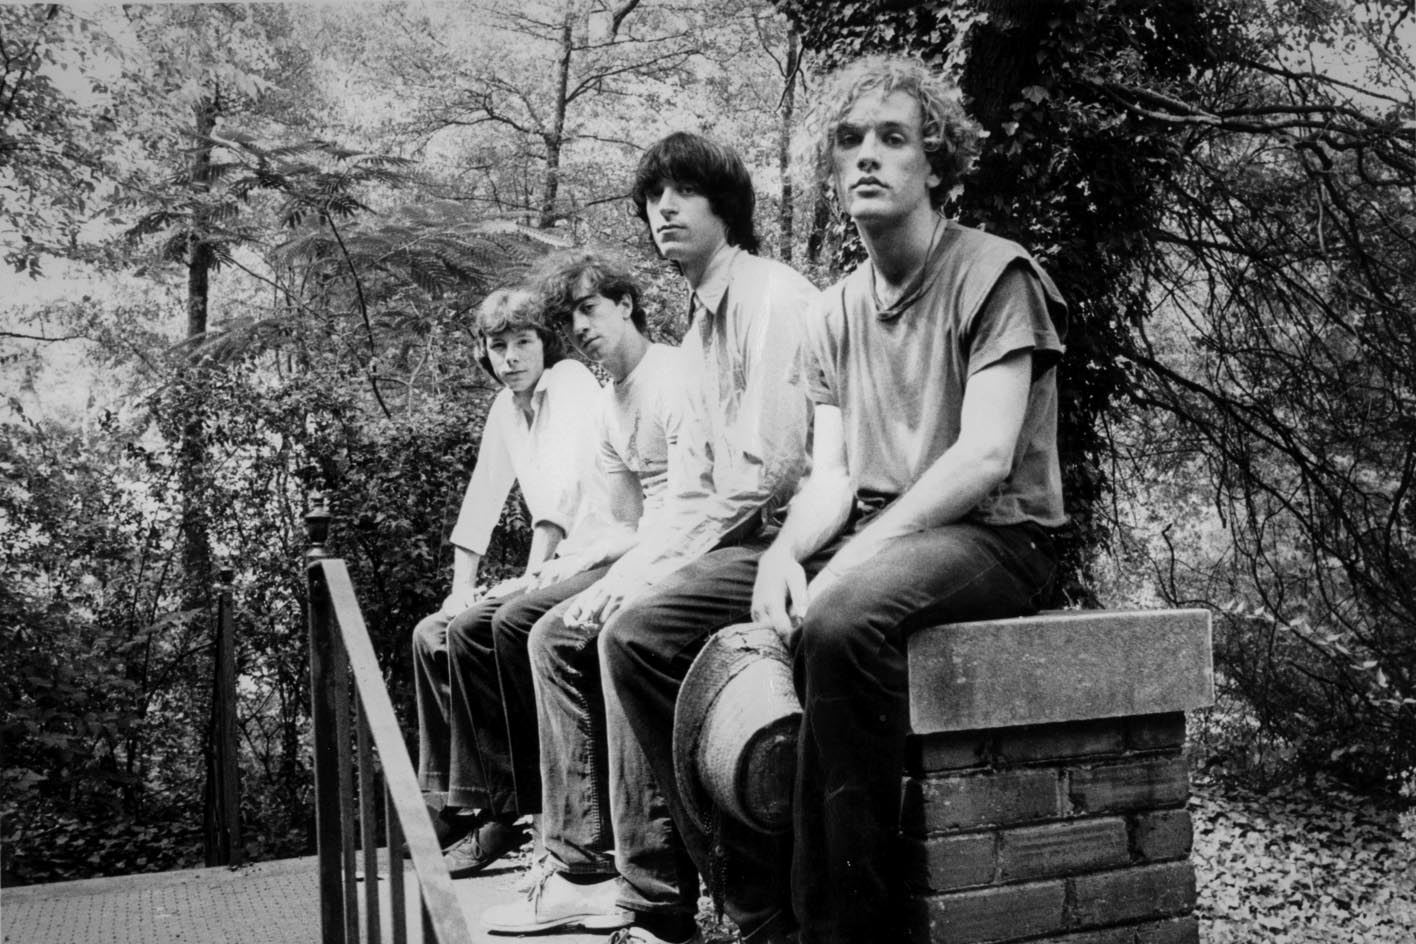 The members of R.E.M. stand on the patio of the Barber Street house